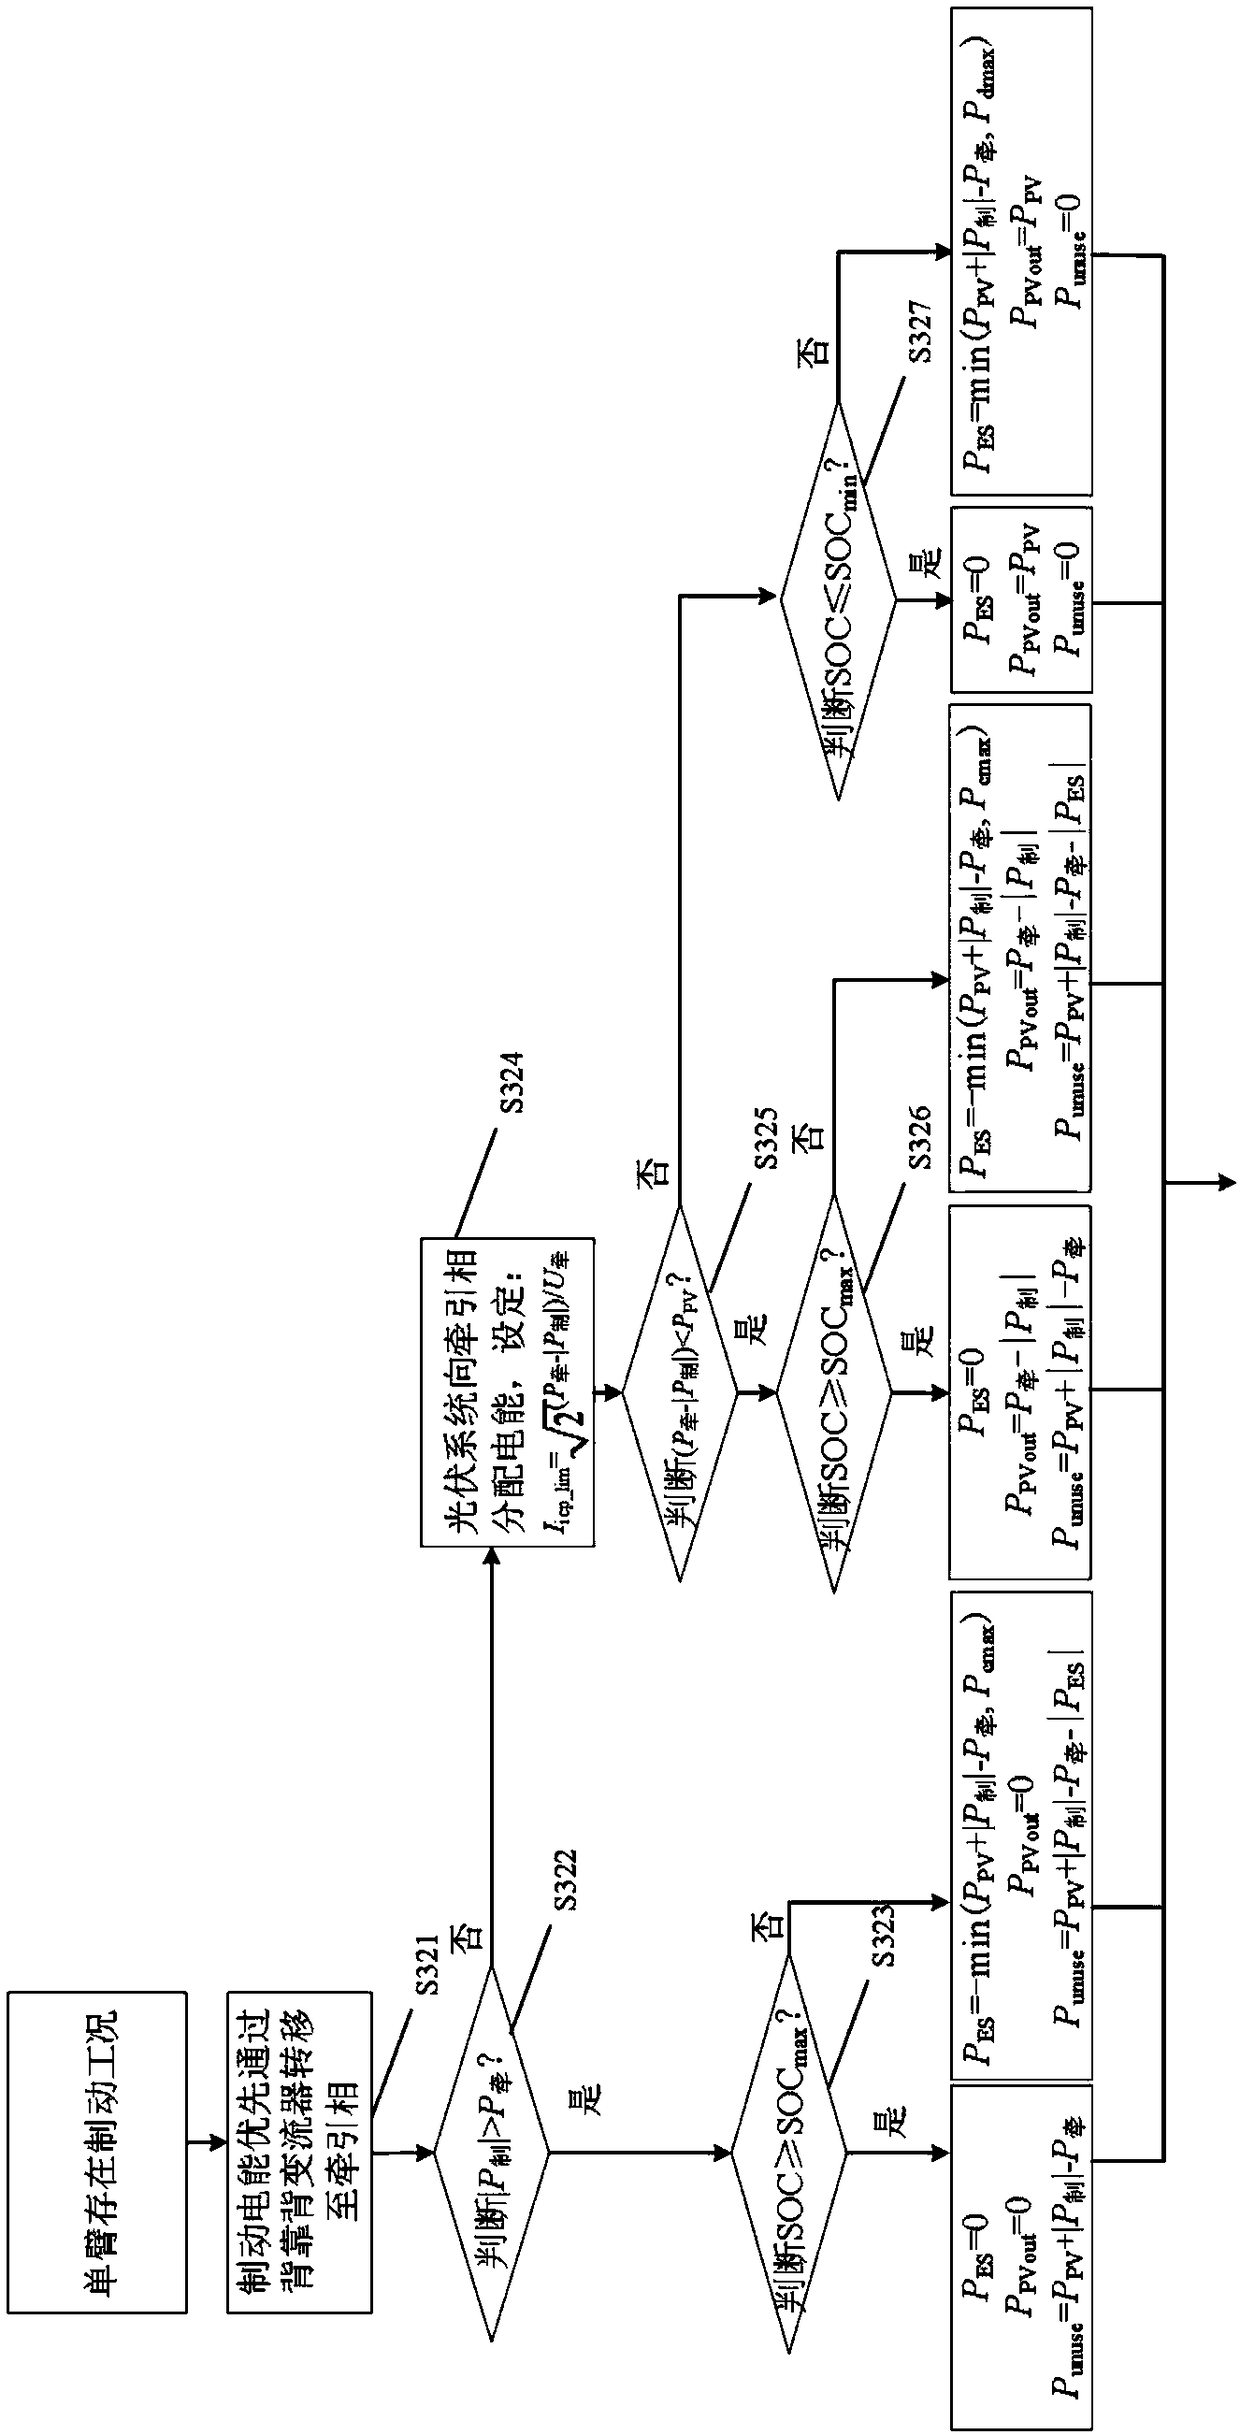 Railway photovoltaic energy storing system and control method for regenerative braking energy recovery